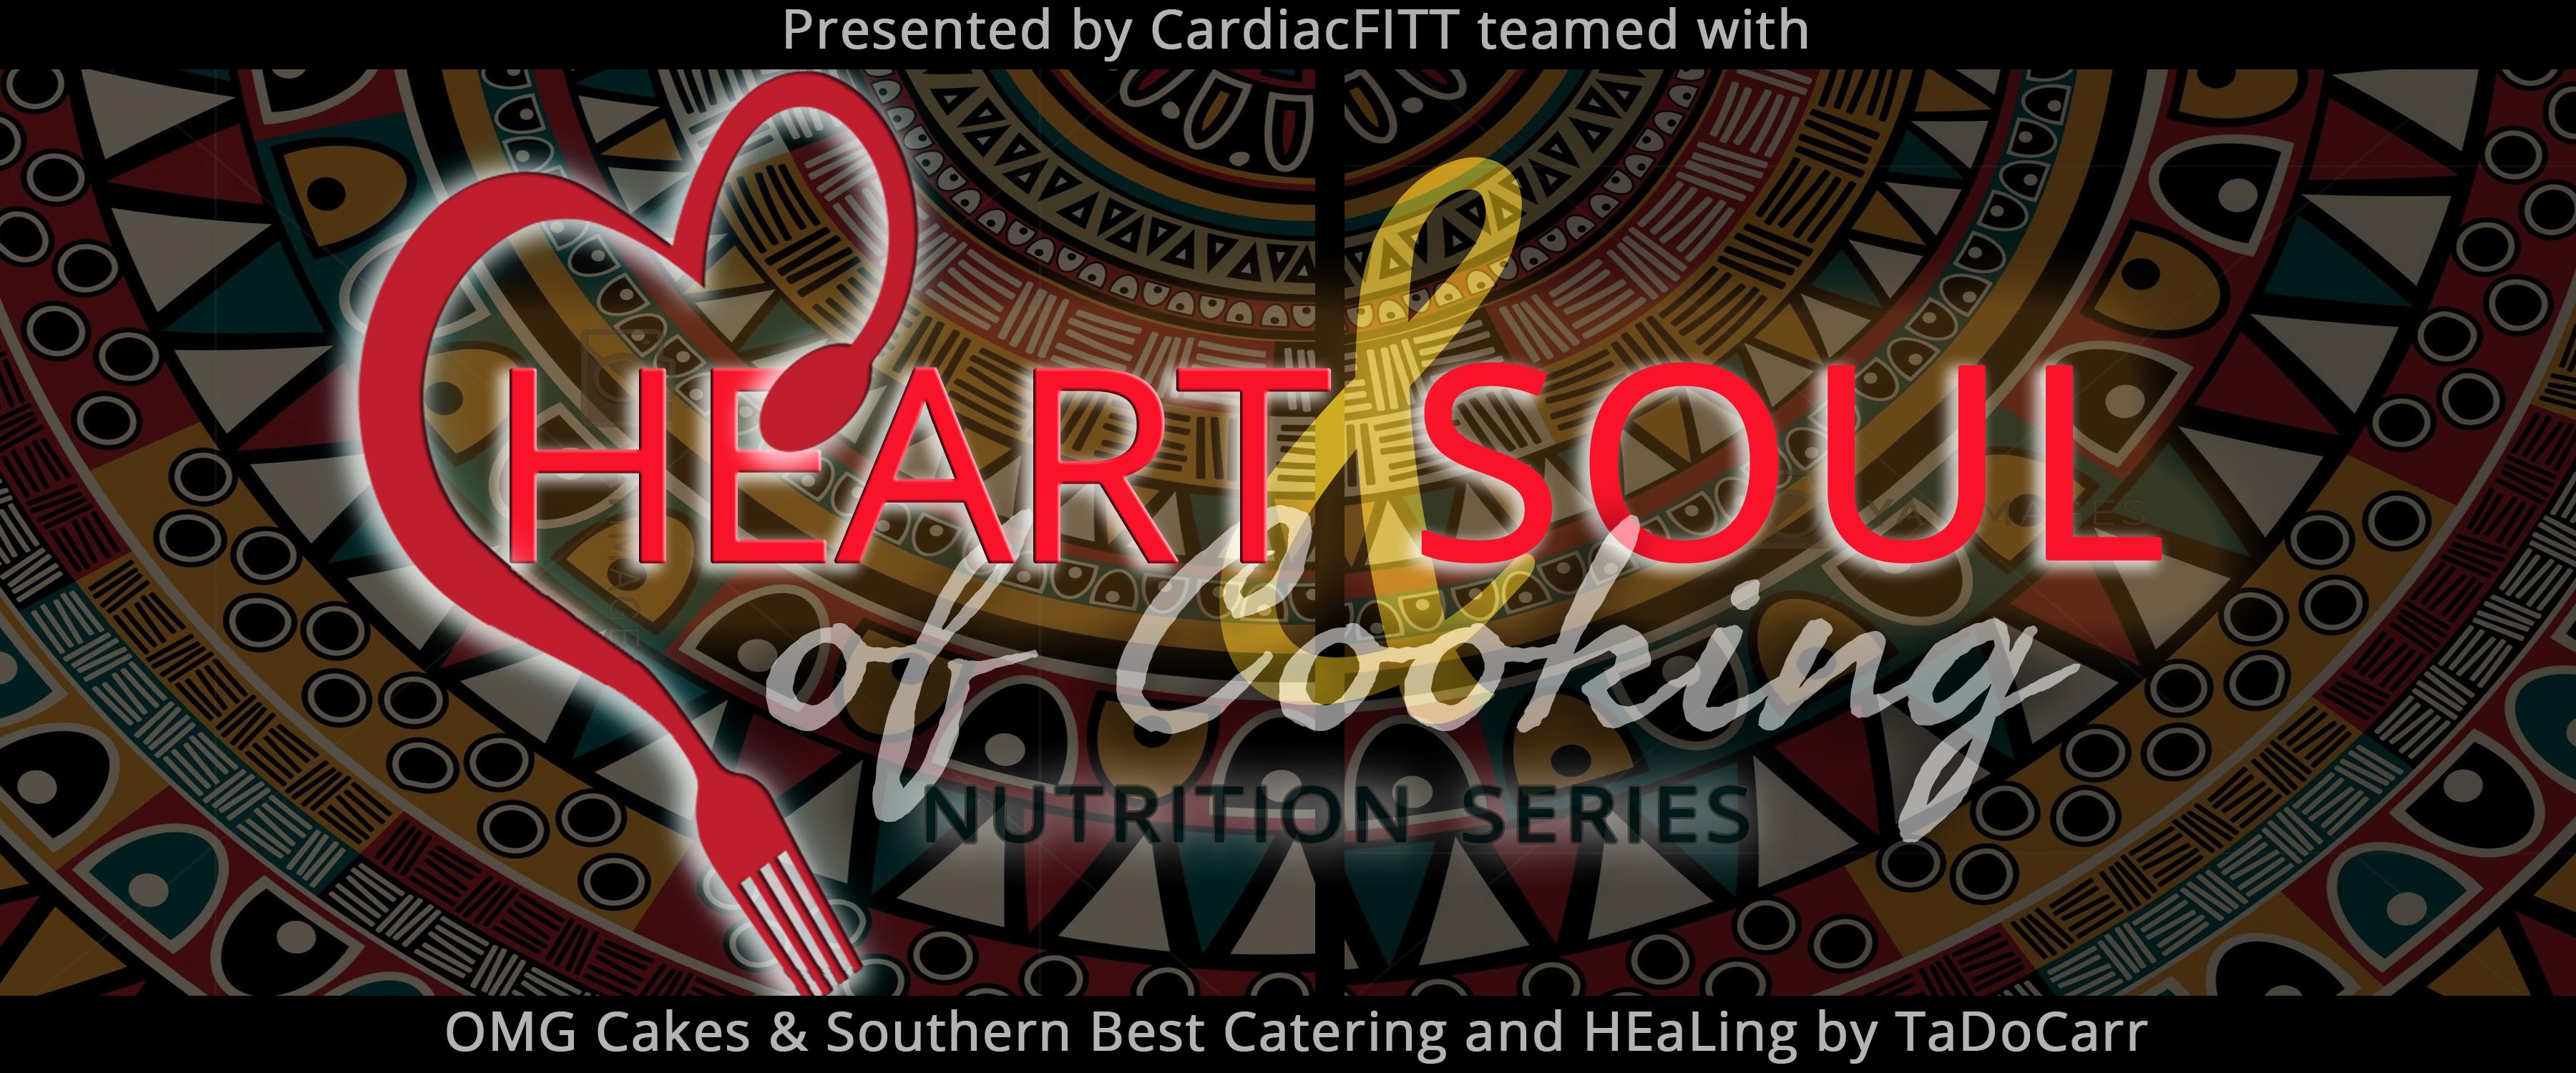 The Heart & Soul of Cooking: Nutrition Series: CardiacFITT